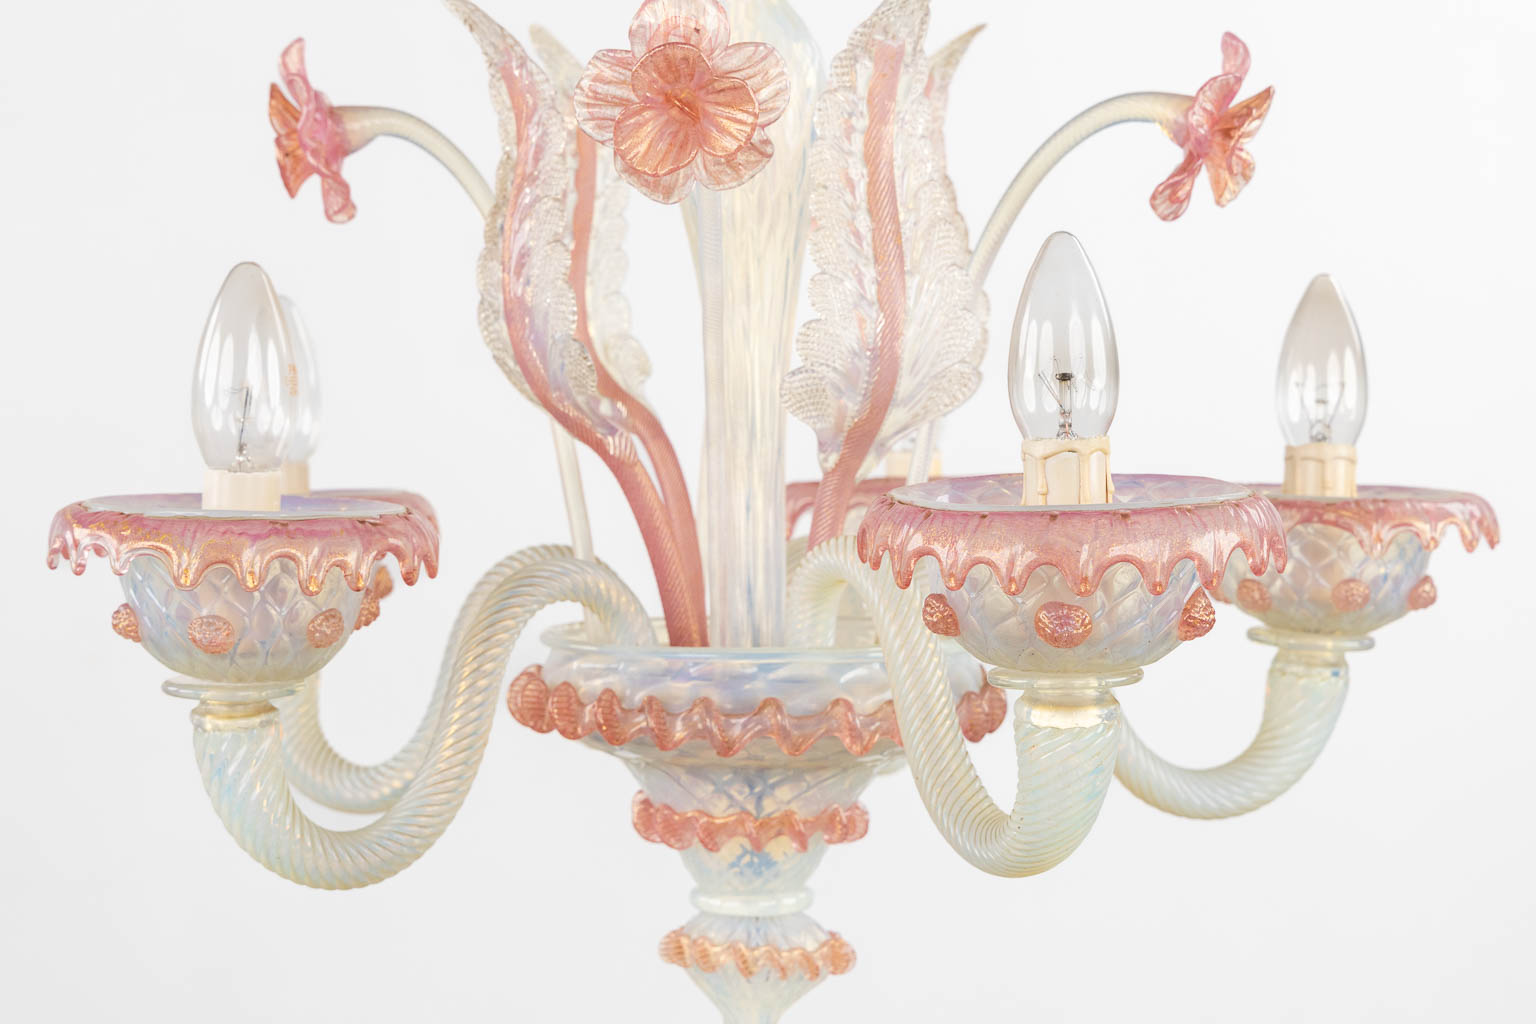 A decorative Venetian glass chandelier, red and white glass. 20th C. (H:70 x D:54 cm)